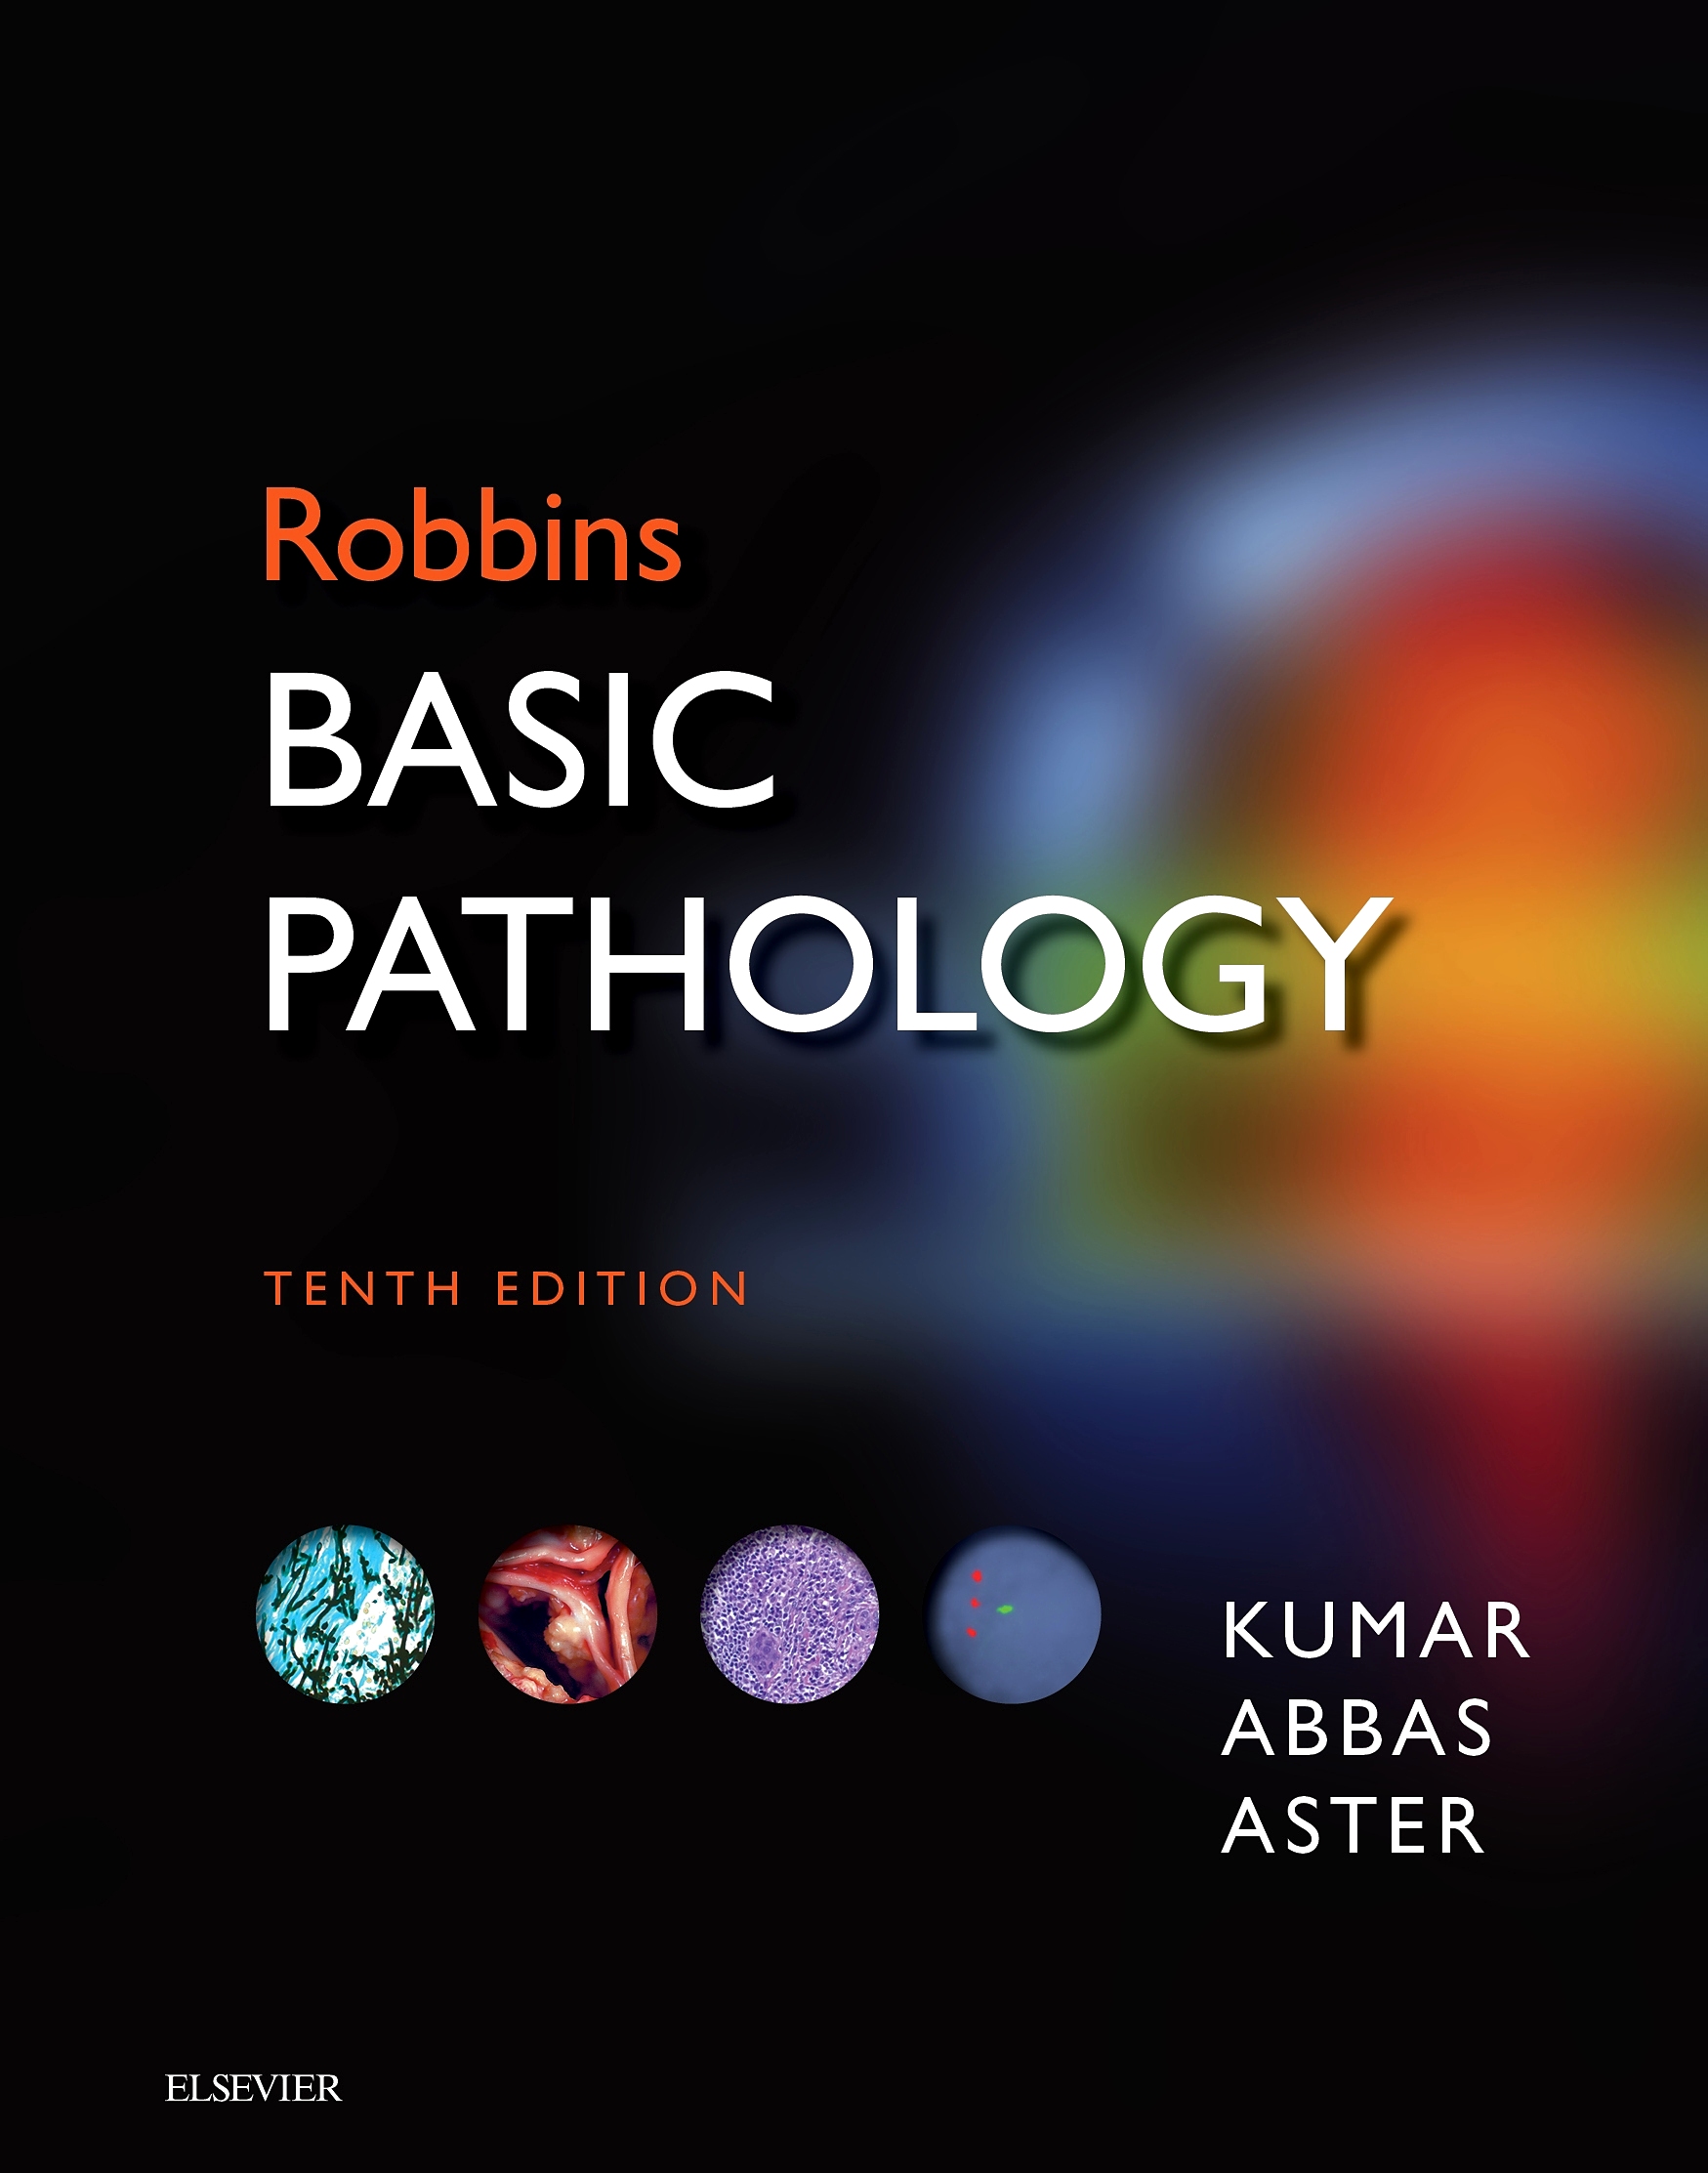 Evolve Resources for Robbins Basic Pathology, 10th Edition